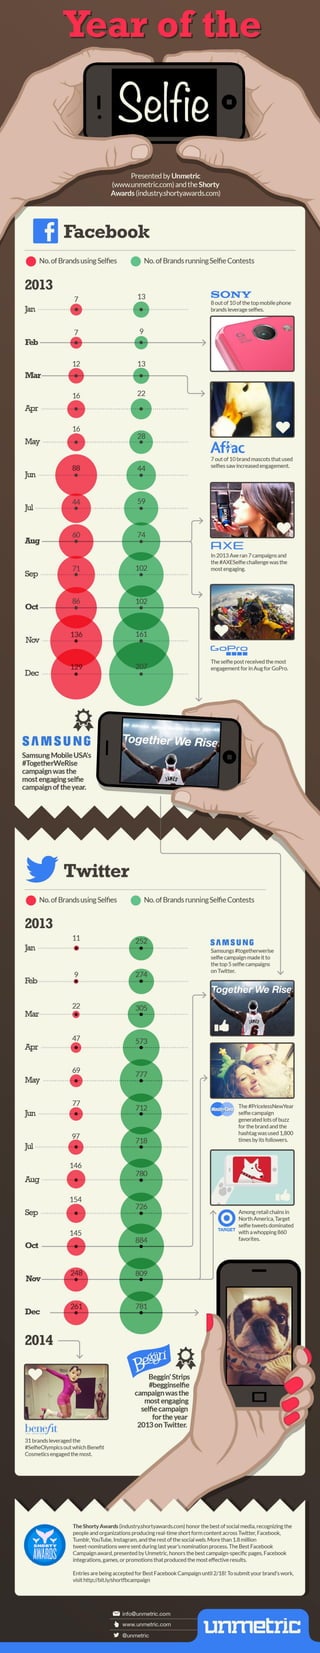 "Year of the Selfie" [INFOGRAPHIC]